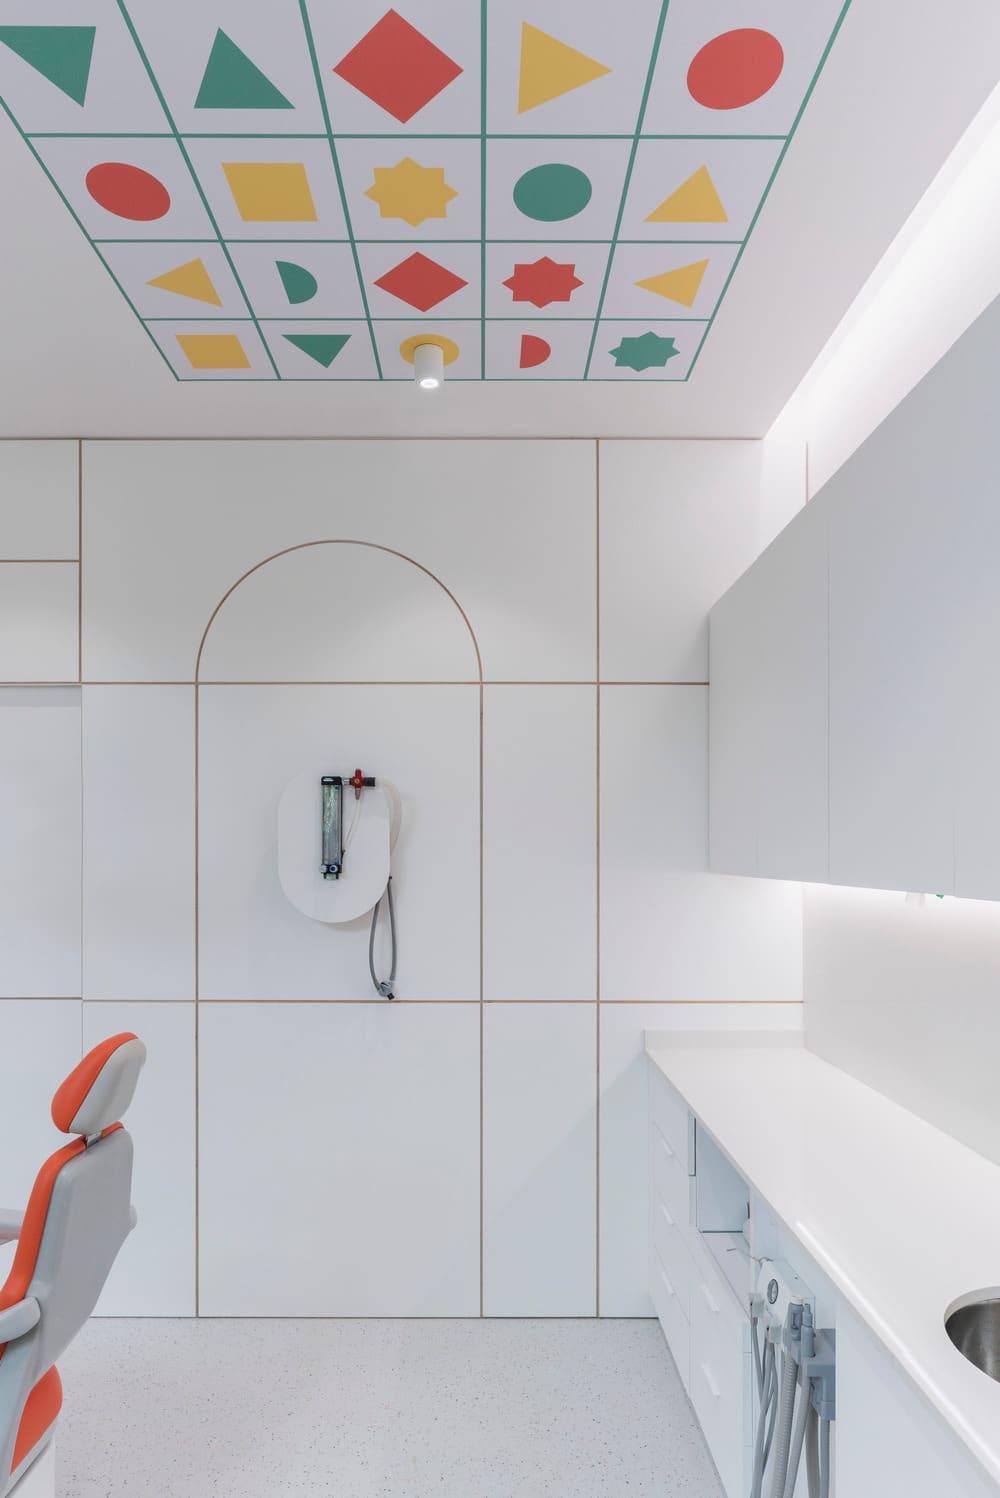 Children´s Dentistry Clinic by Vitale